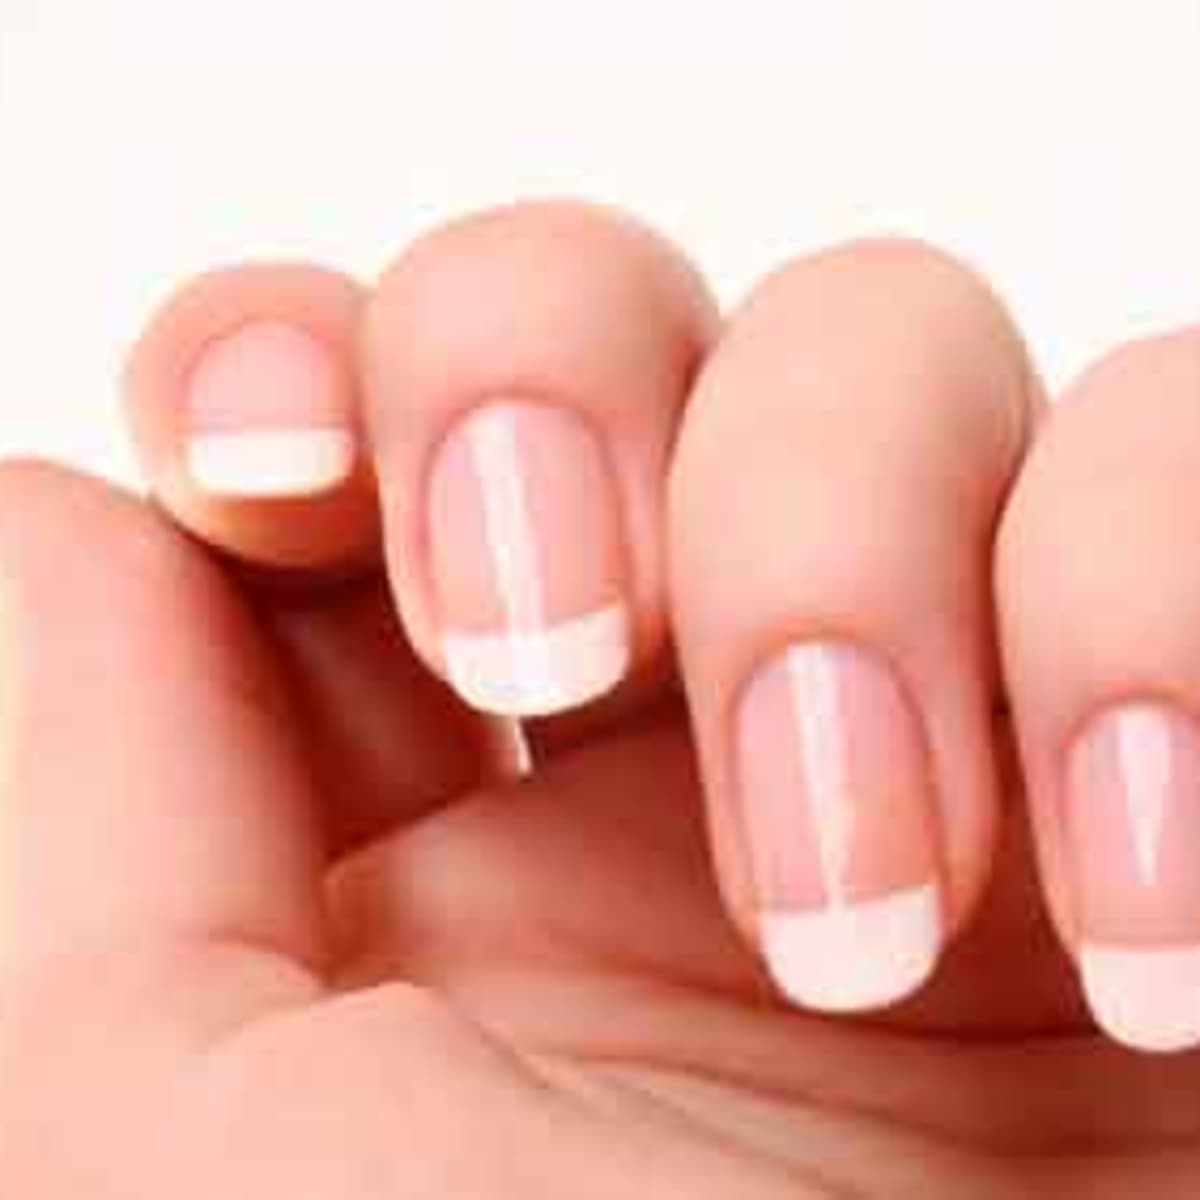 Is It Bad to Get Your Cuticles Cut at the Nail Salon? - Cuticle Cutting  Dangers